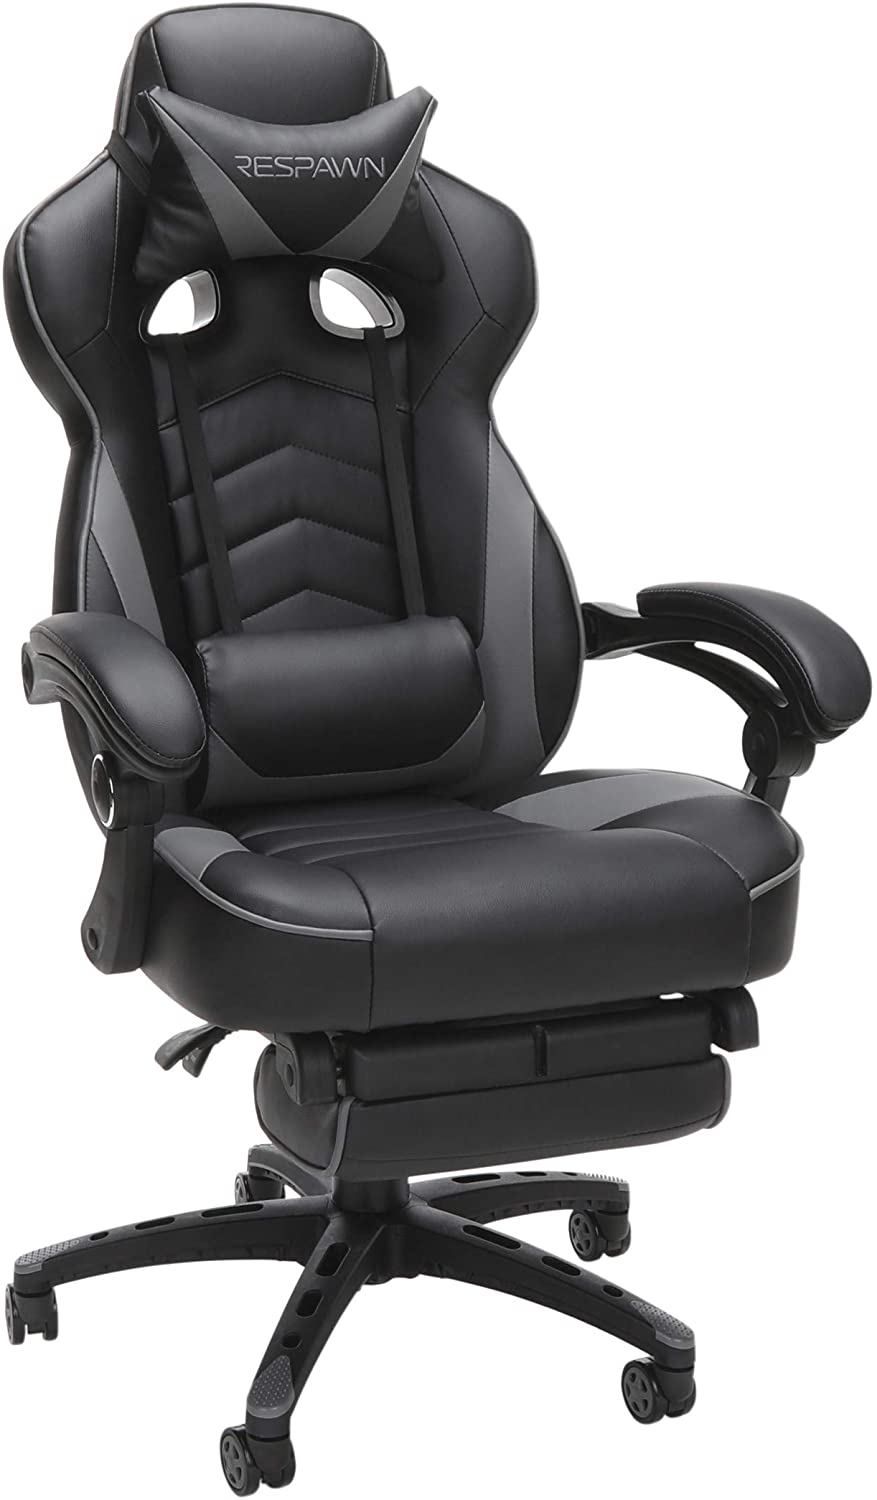 Best gaming chairs 2022 | iMore